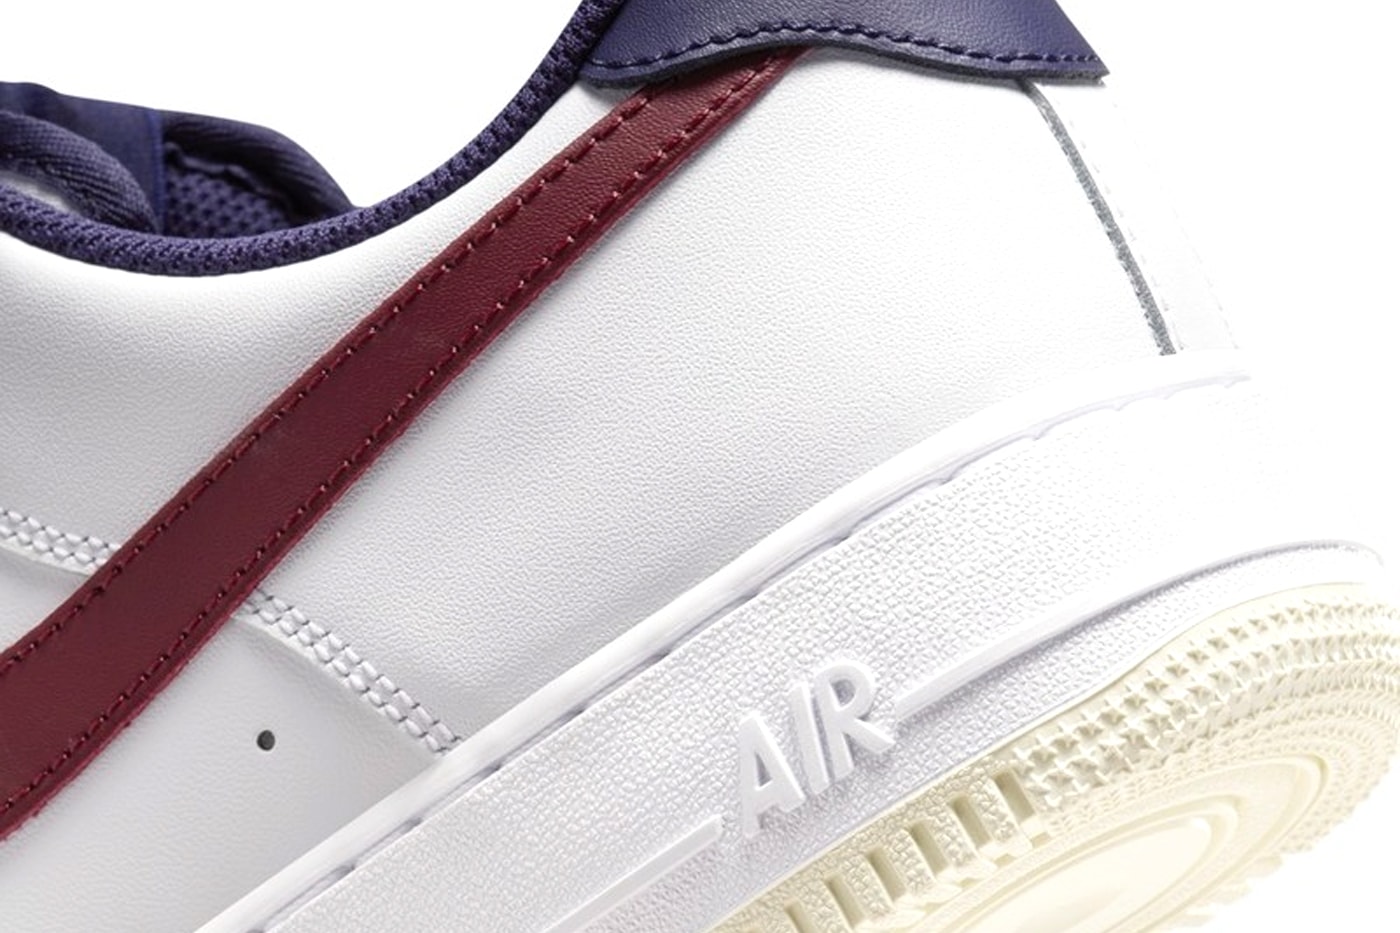 Nike Air Force 1 Low from Nike To You FV8105-161 Release Info